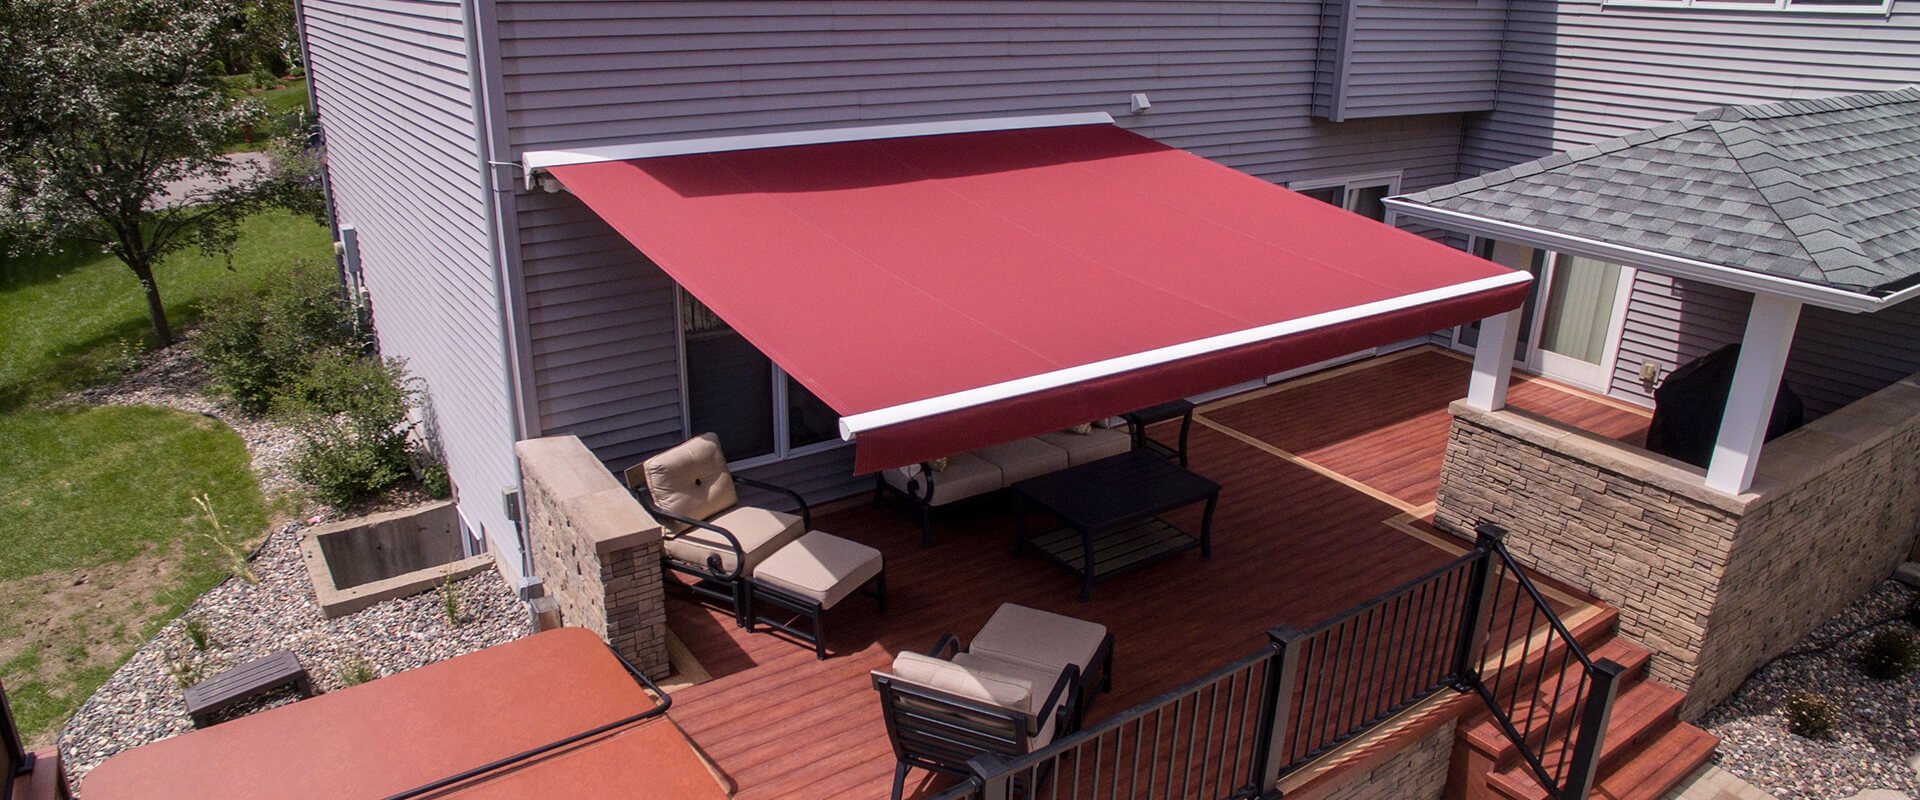 Retractable Awning vs Fixed Awning—Which is Best?